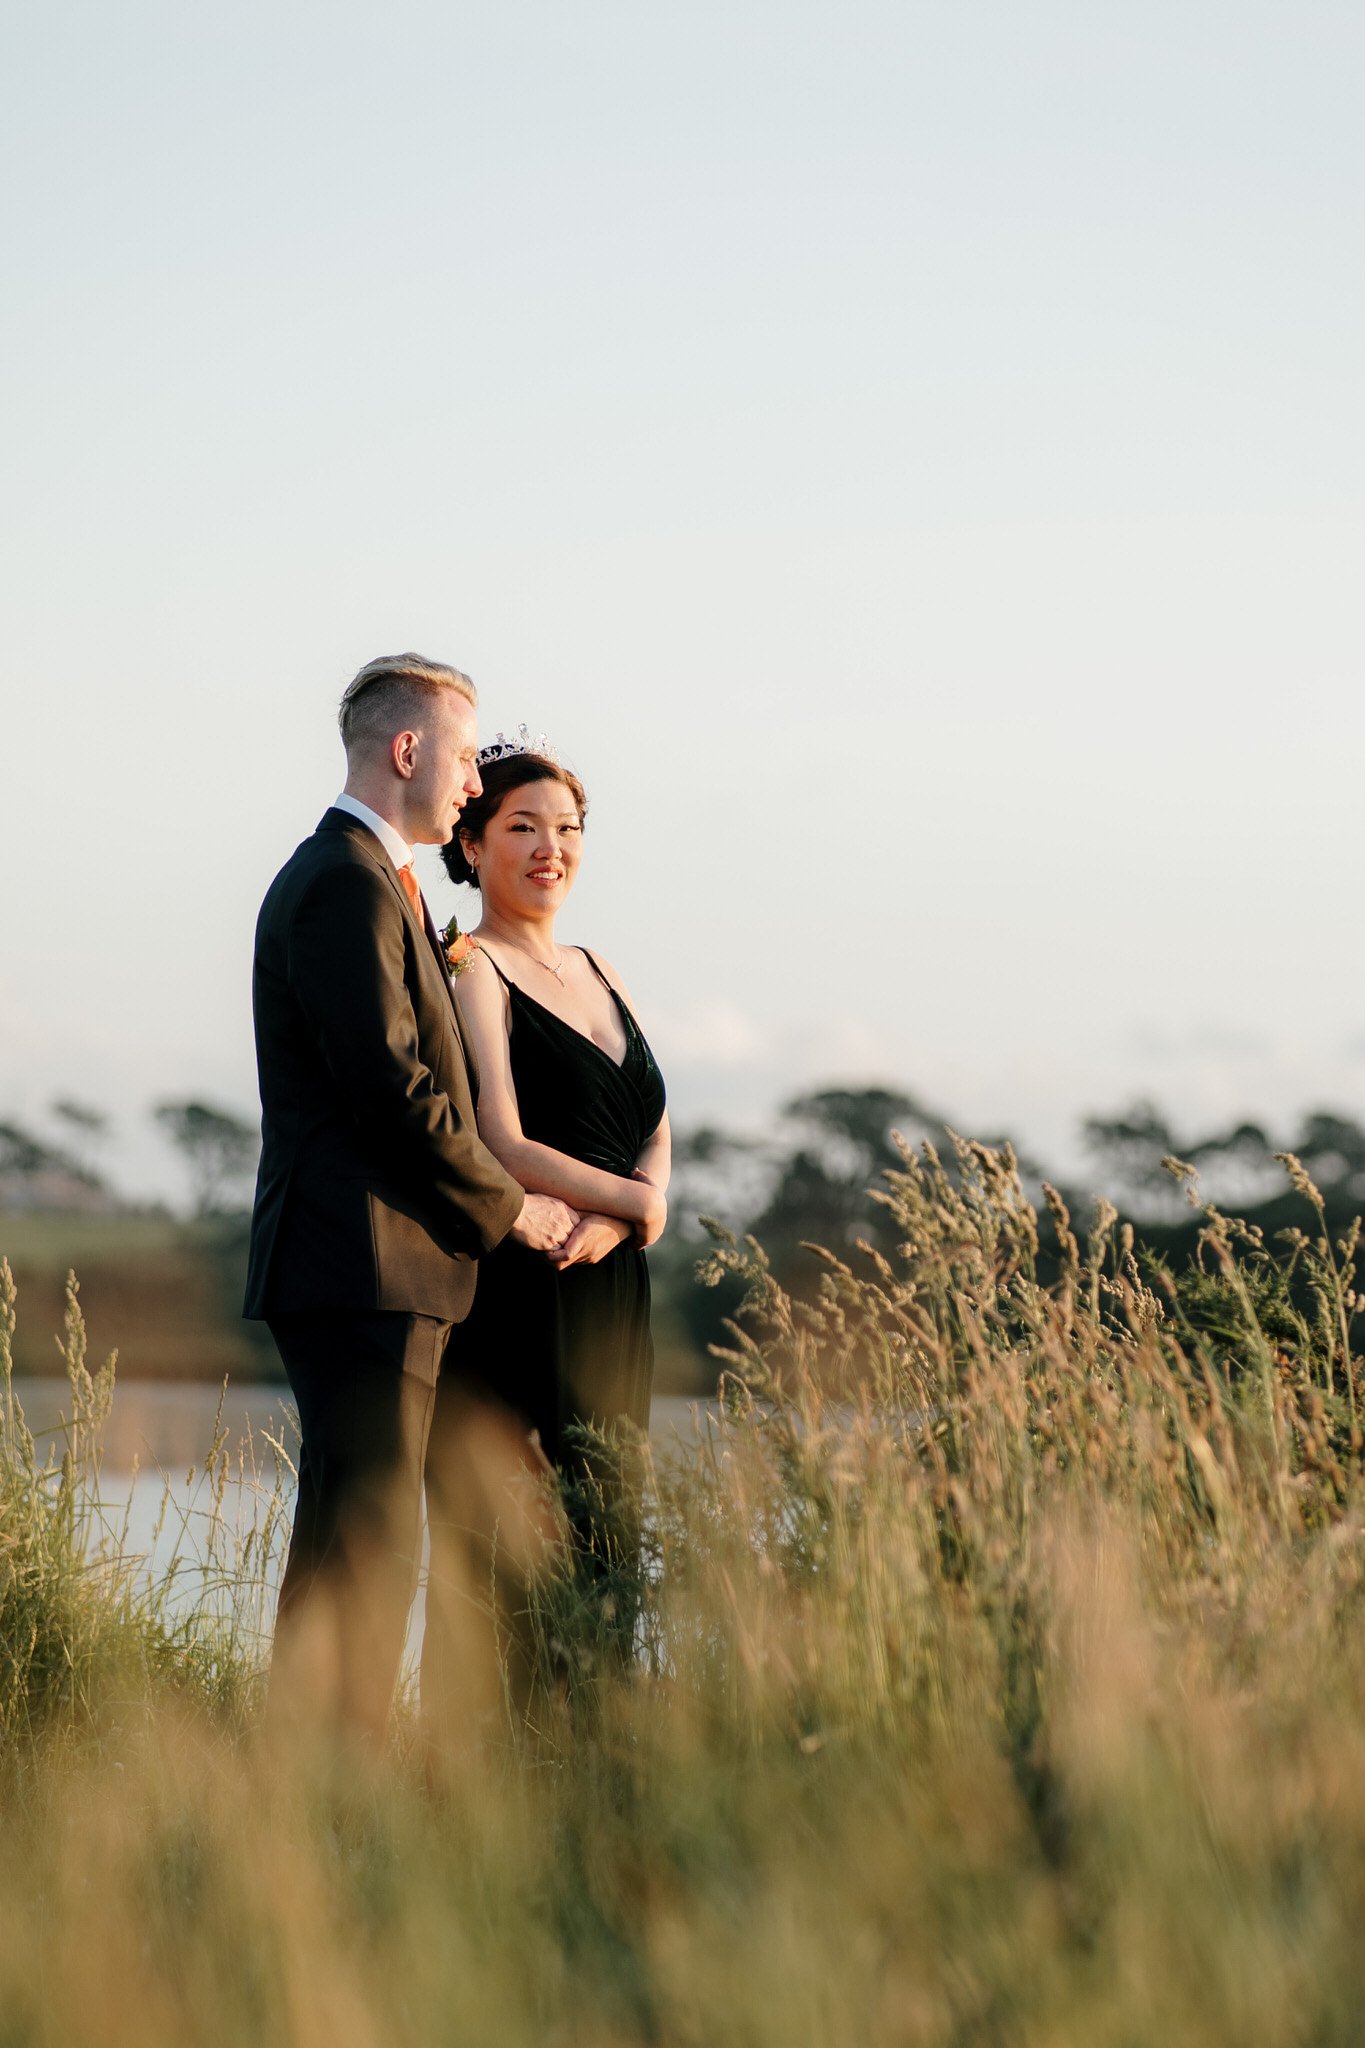 huntly-house-auckland-wedding-venue-mansion-vintage-luxury-accommodation-photographer-videography-dear-white-productions-photo-film-south-clarks-beach (118).jpg